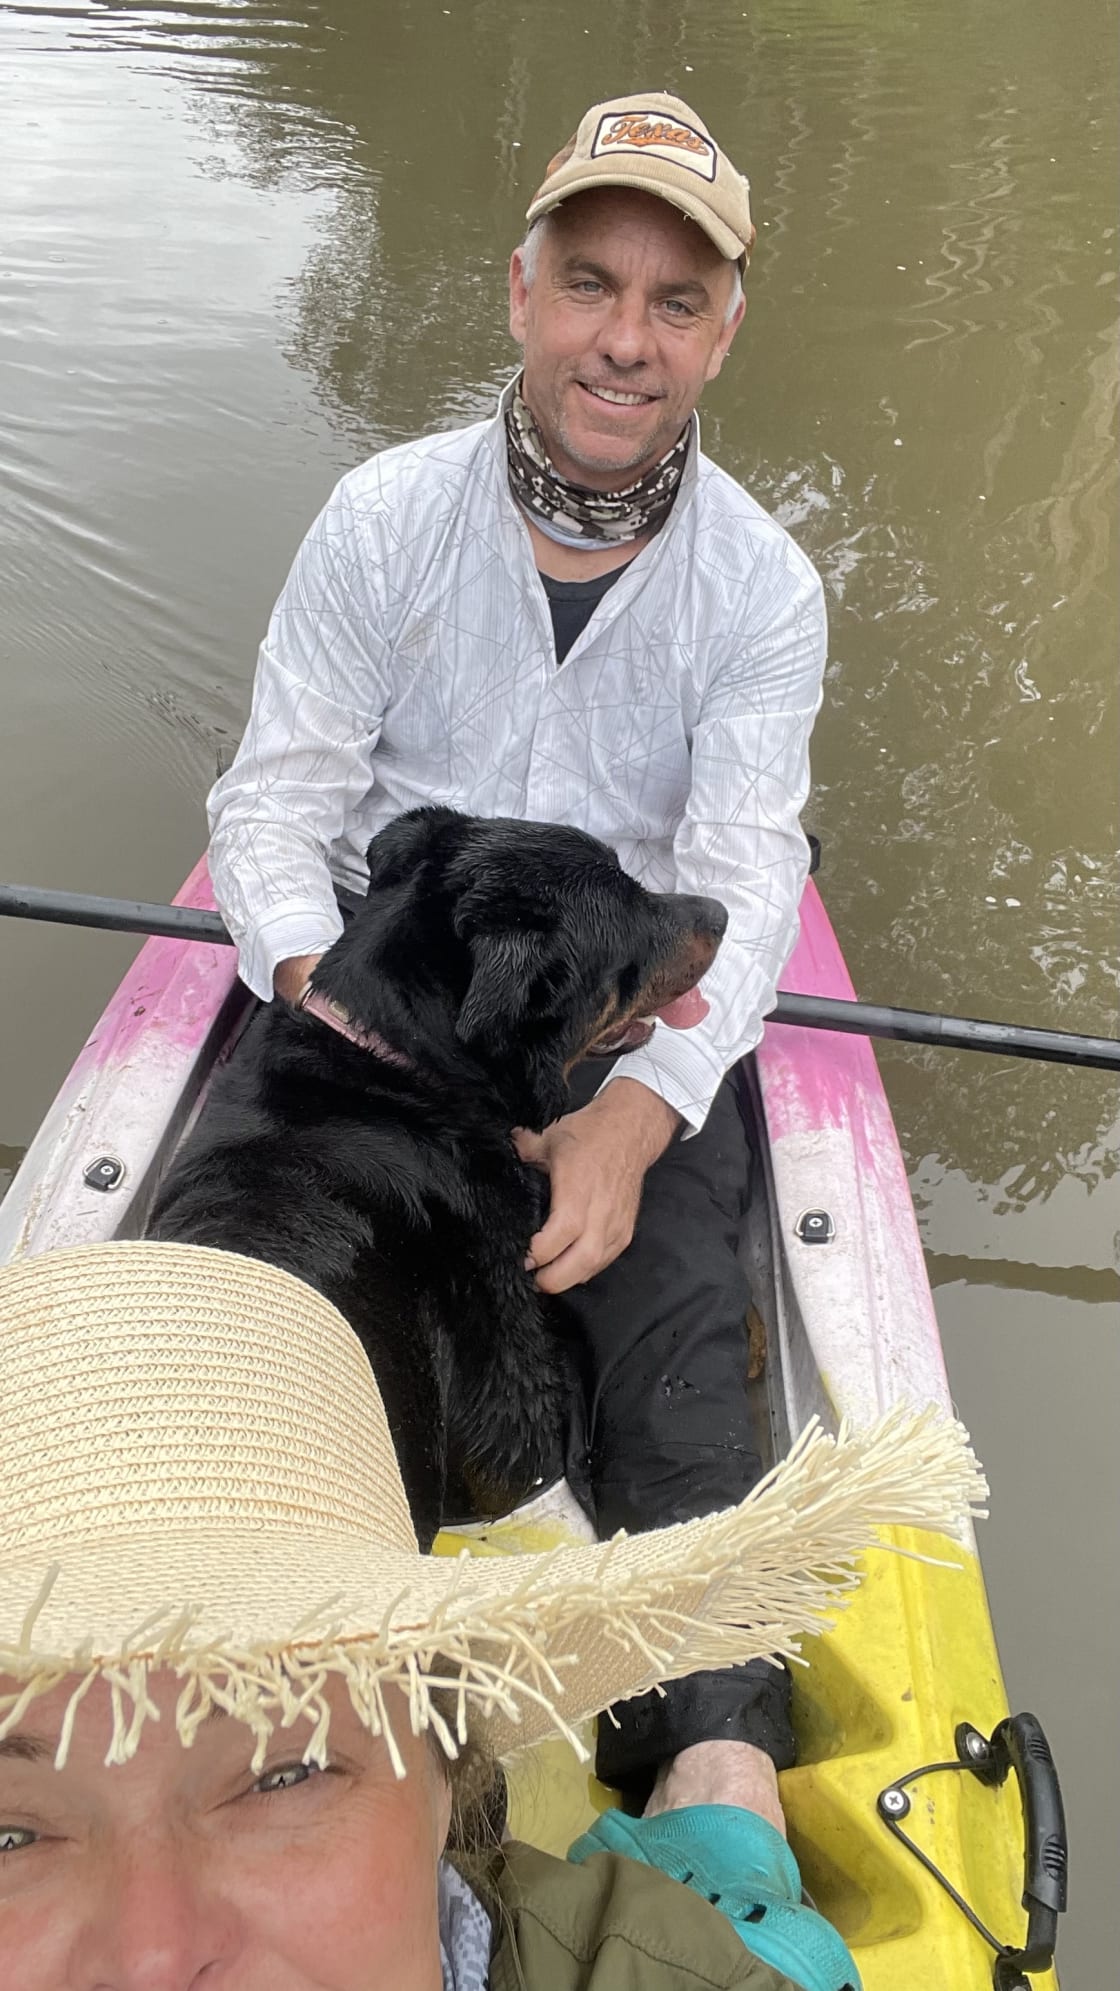 Taking our Rottweiler on a double kayak for the first time was a mission but a lot of fun